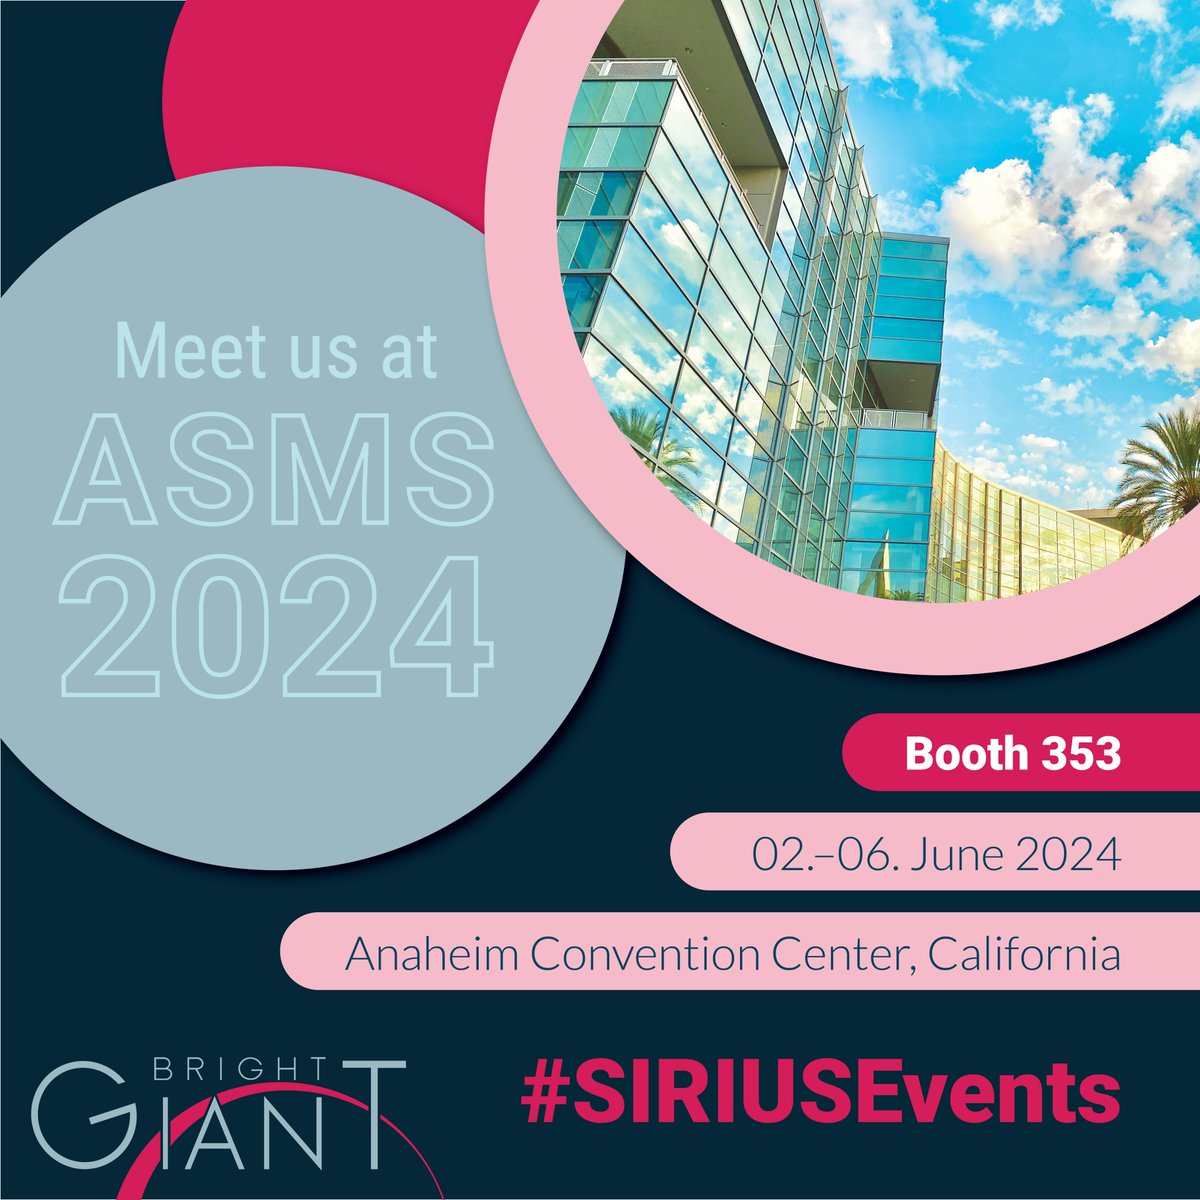 Join us at #ASMS2024! 

As leaders in #SmallMolecule #MassSpectrometry, we're eager to showcase our cutting-edge #StructureElucidation software #SIRIUS_MS. Don't miss this chance to connect with our team and visit our talks, workshops, posters, and our booth.

#SIRIUSEvents